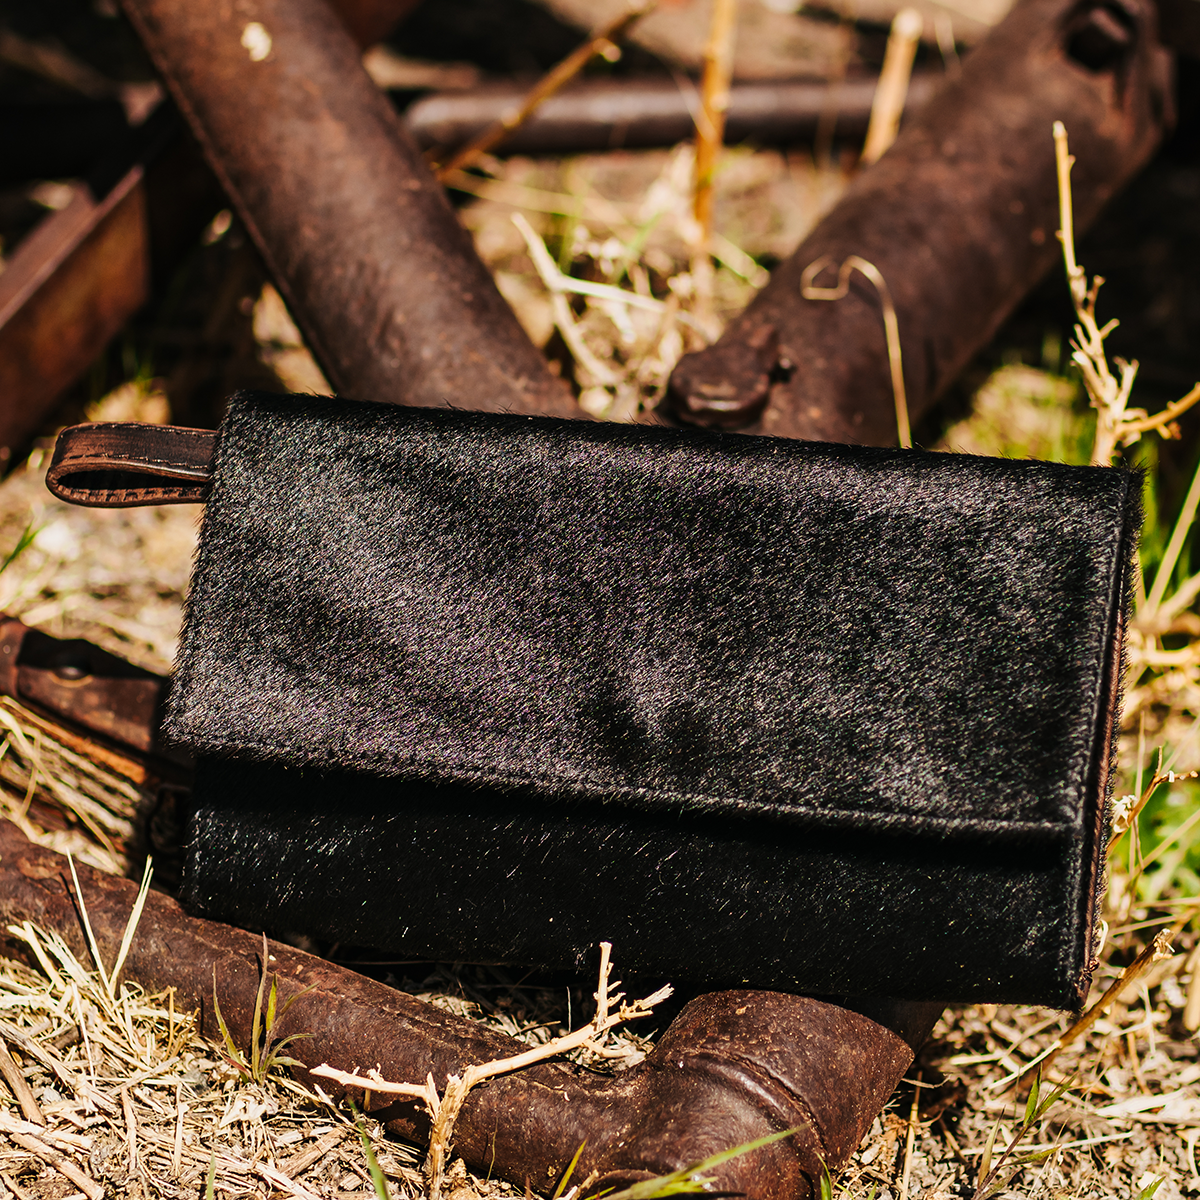 FREEBIRD lola black clutch with interchangeable wrist strap and adjustable cross-body strap and multiple interior pockets